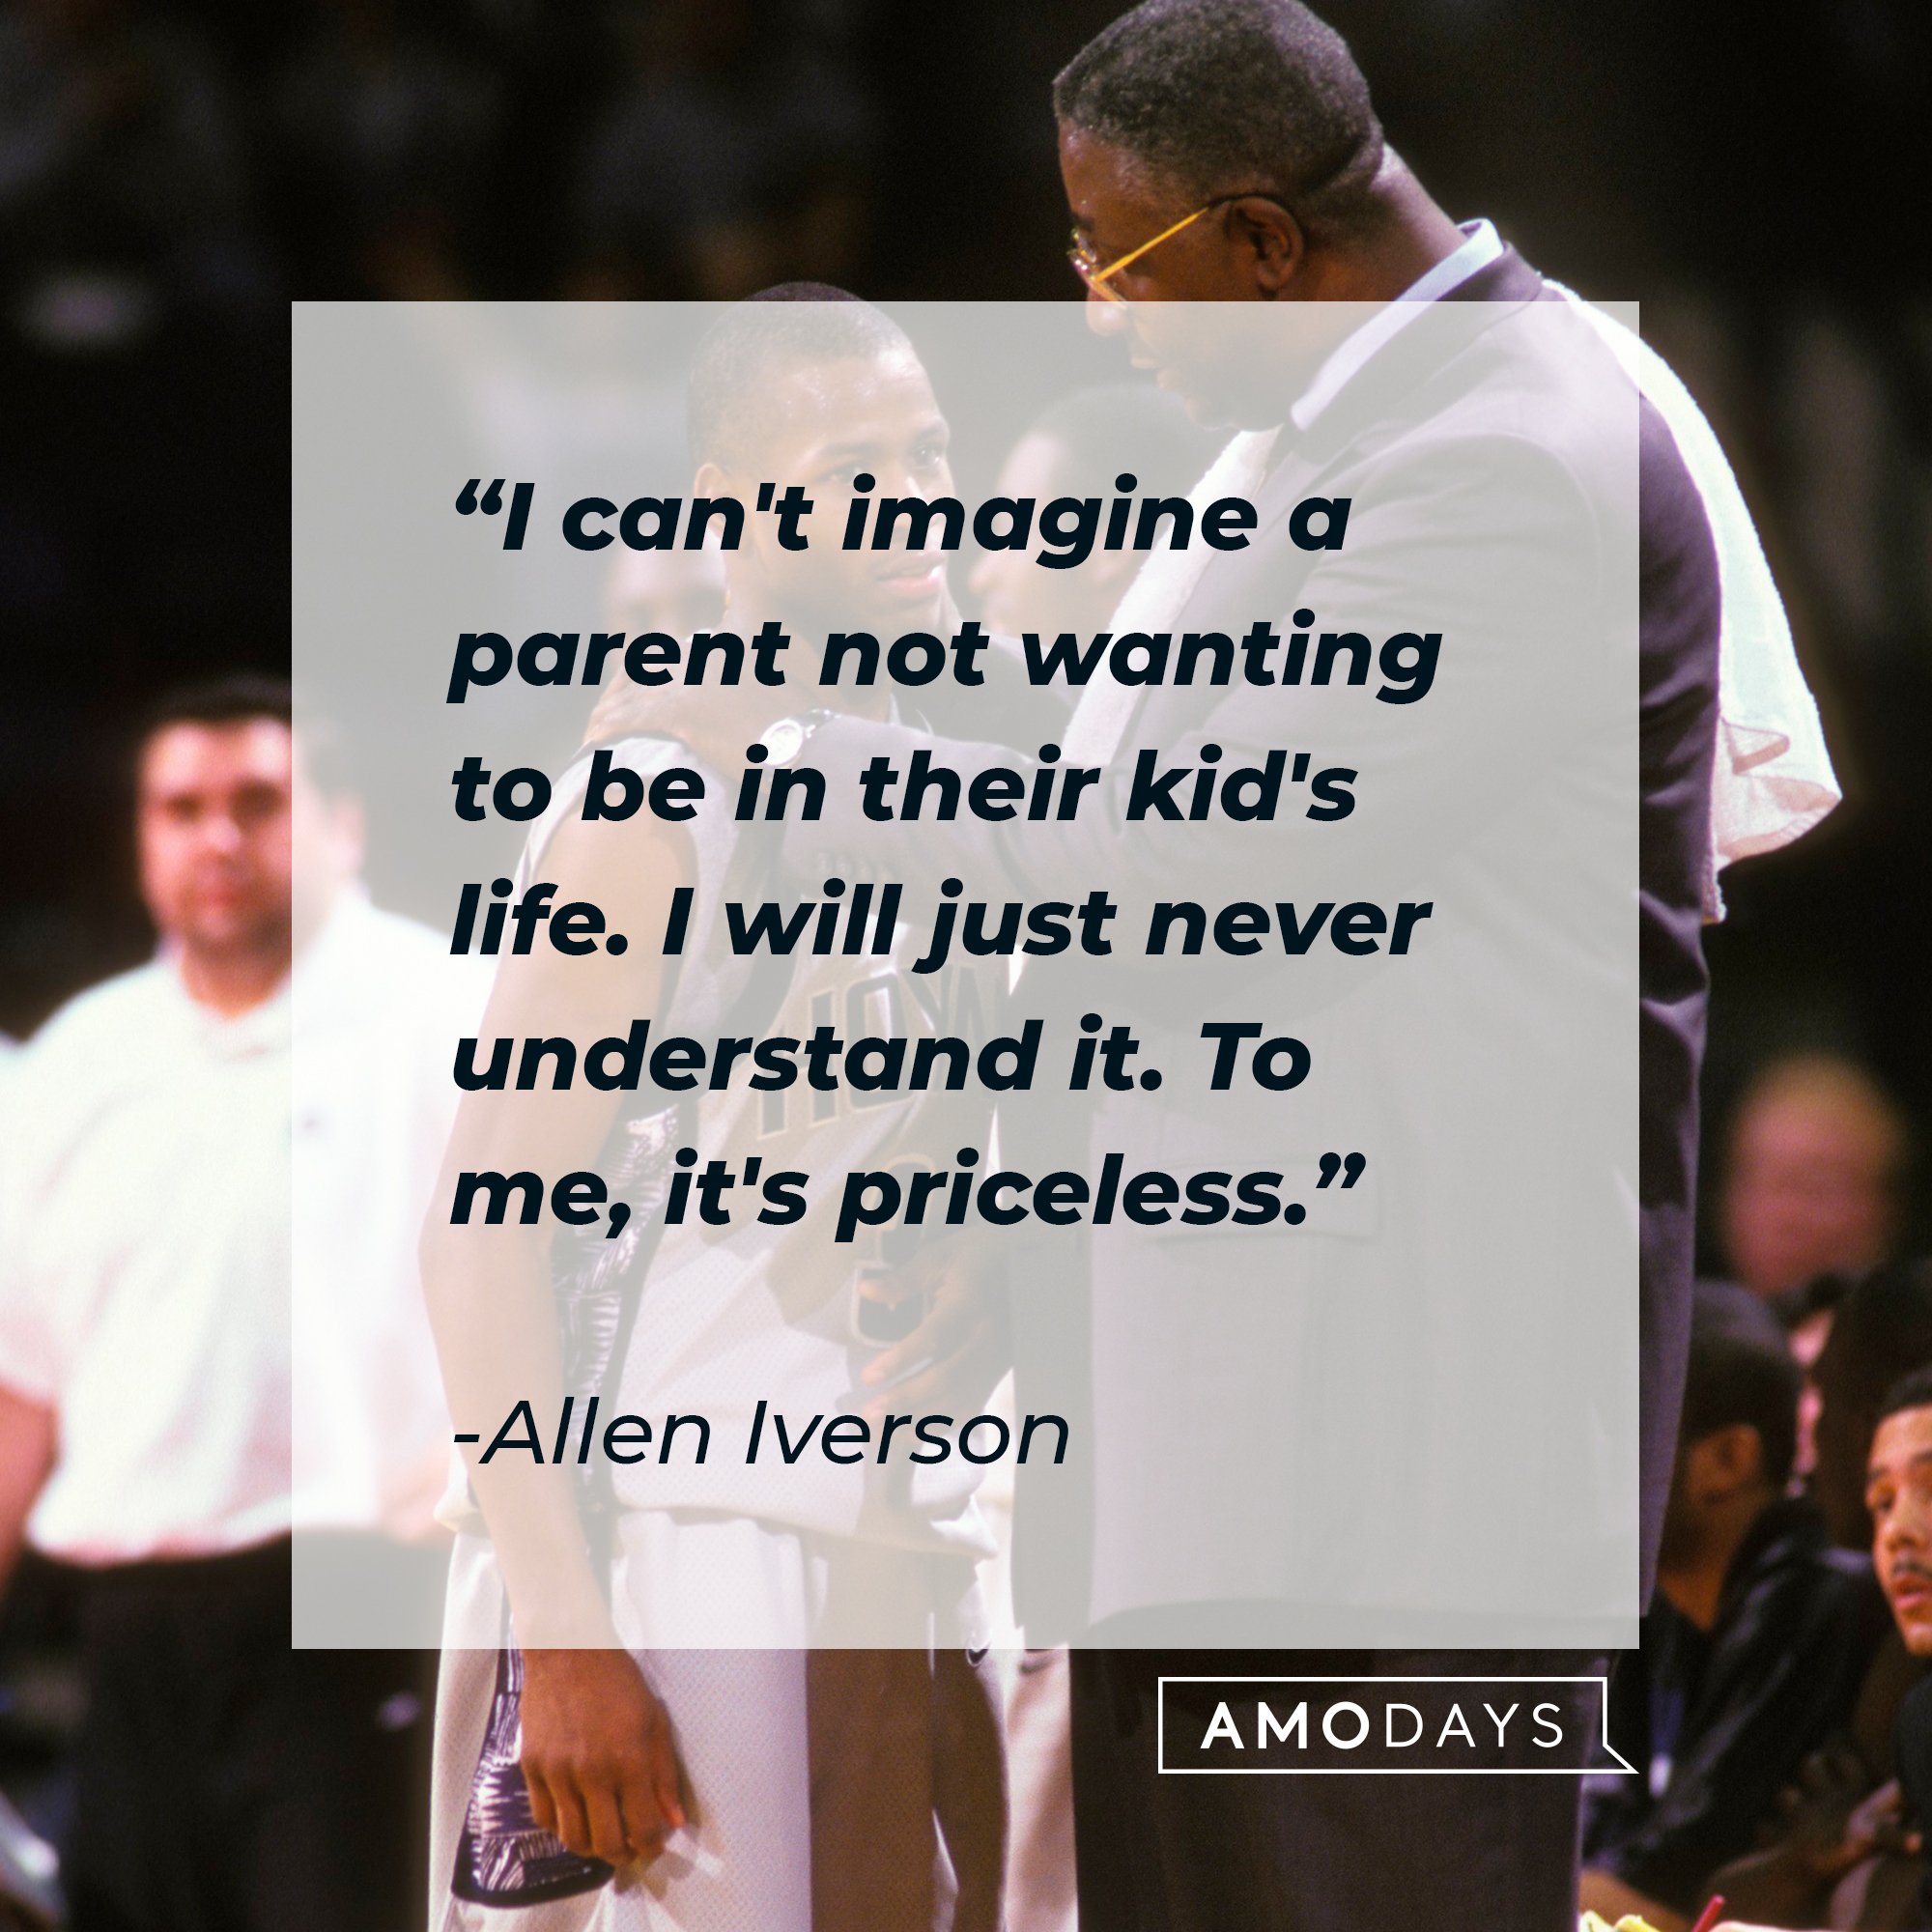 Allen Iverson's quote: "I can't imagine a parent not wanting to be in their kid's life. I will just never understand it. To me, it's priceless."  | Image: AmoDays